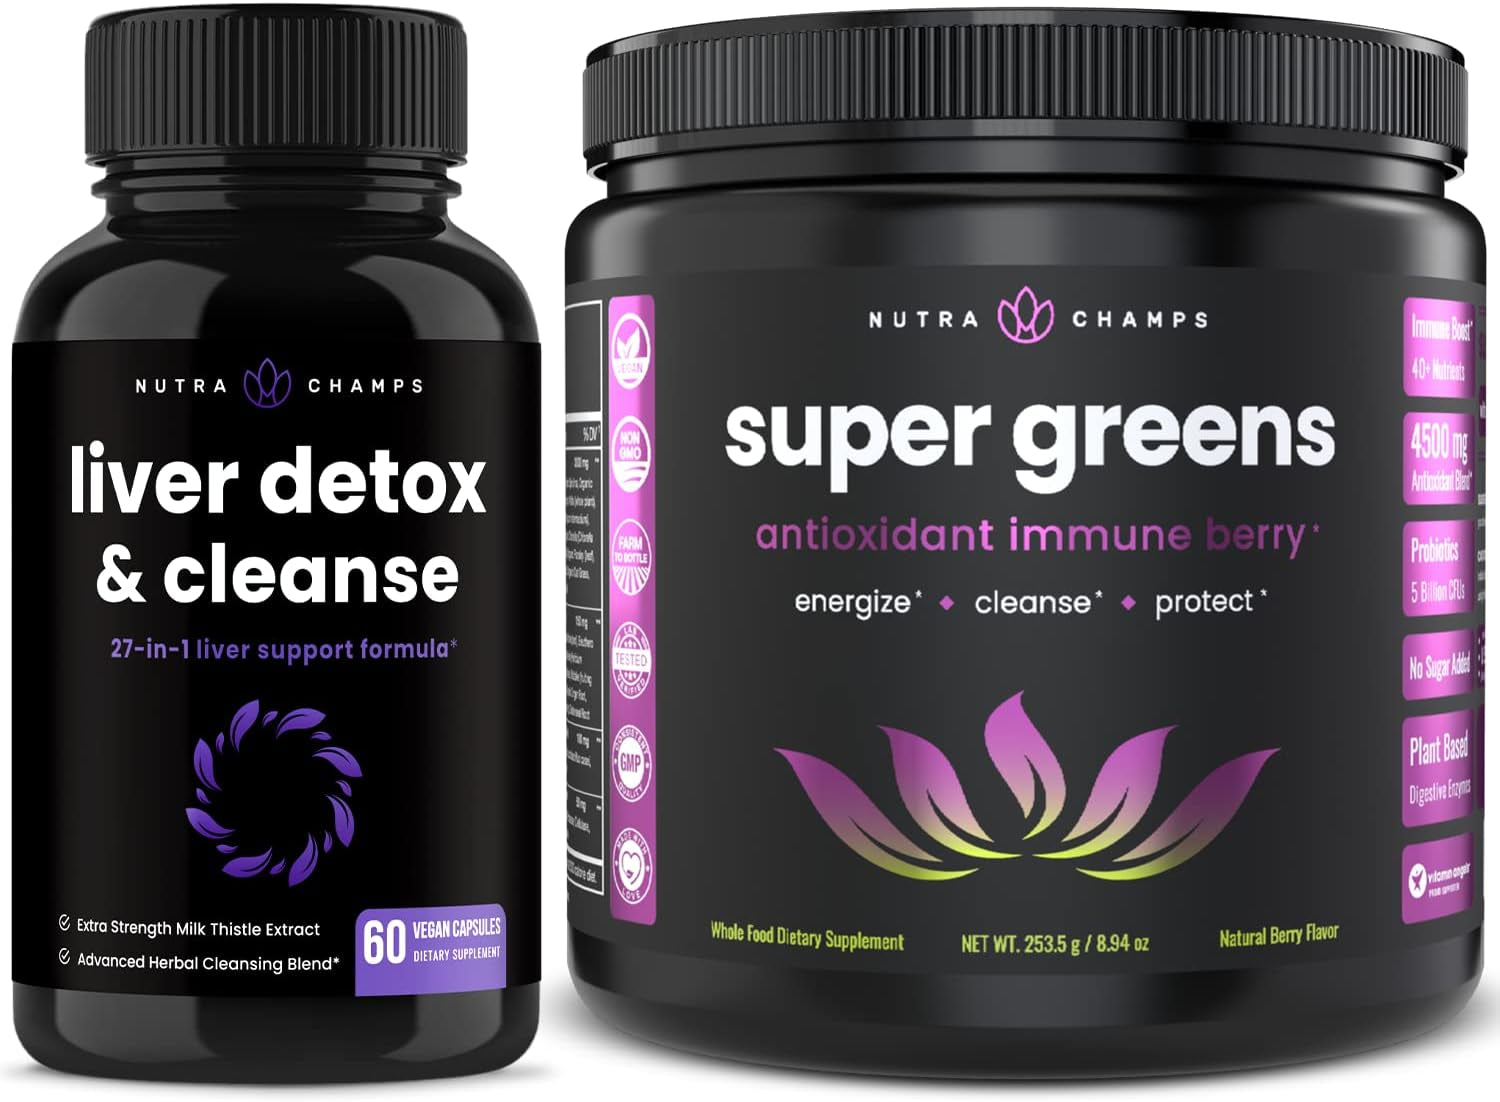 Nutrachamps Liver Cleanse Detox Capsules and Super Greens Antioxidant Superfood Powder Bundle